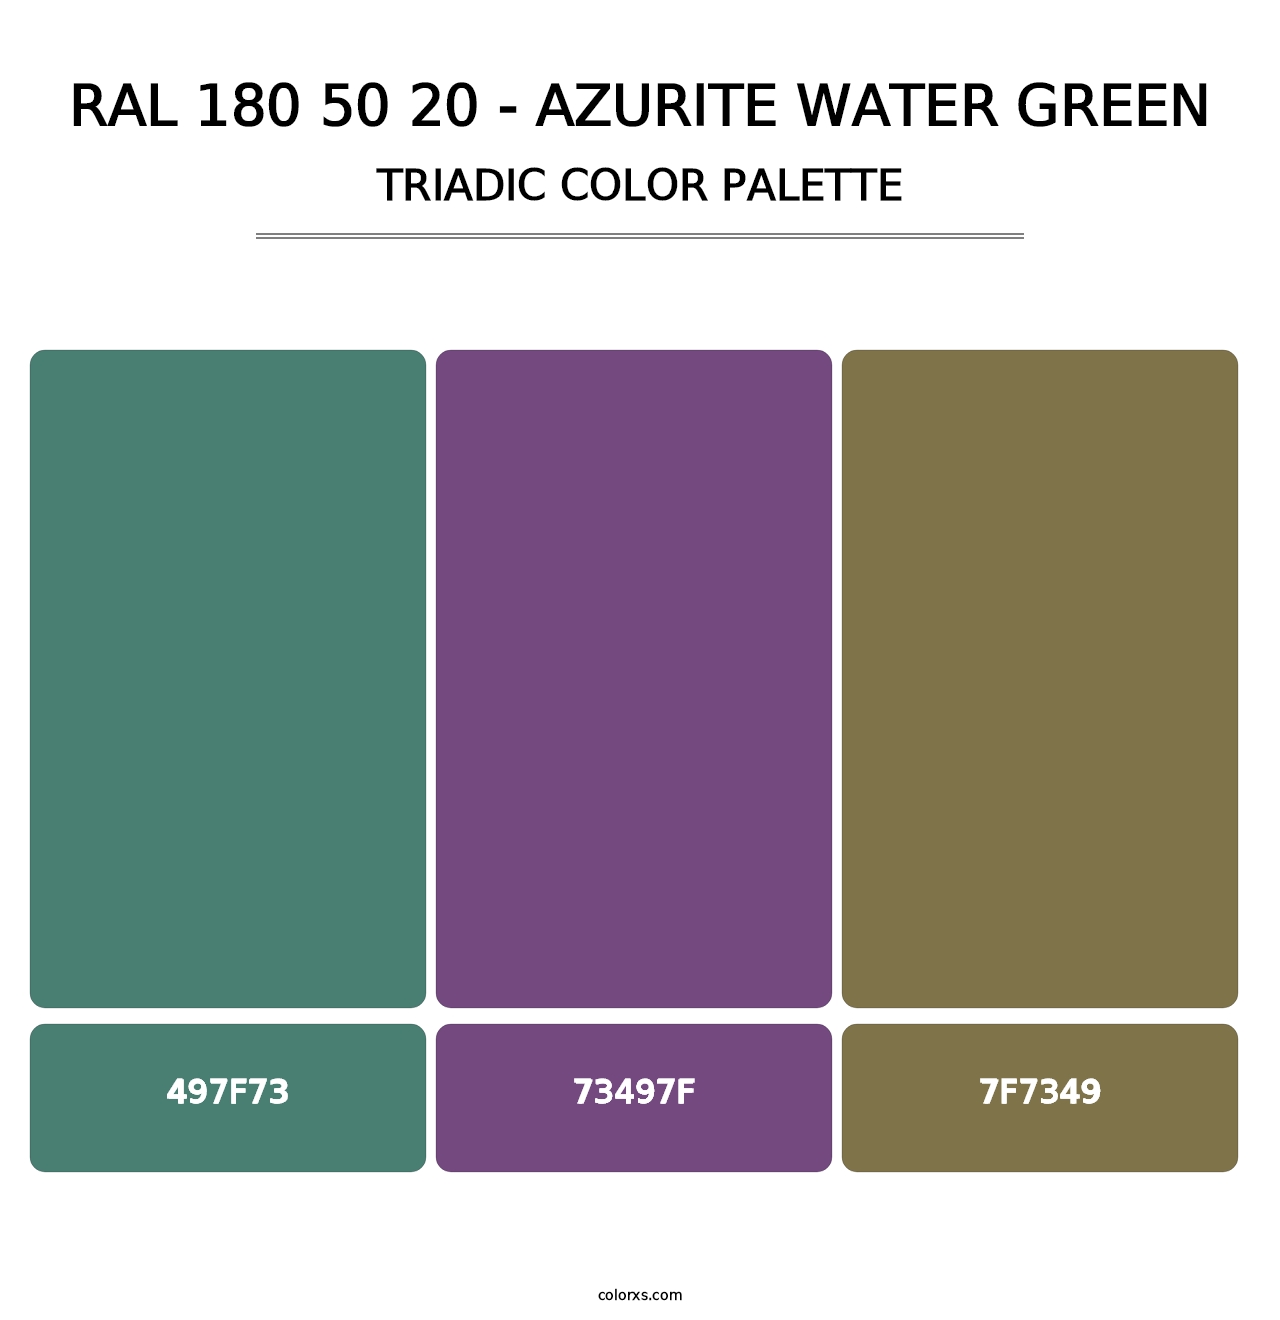 RAL 180 50 20 - Azurite Water Green - Triadic Color Palette